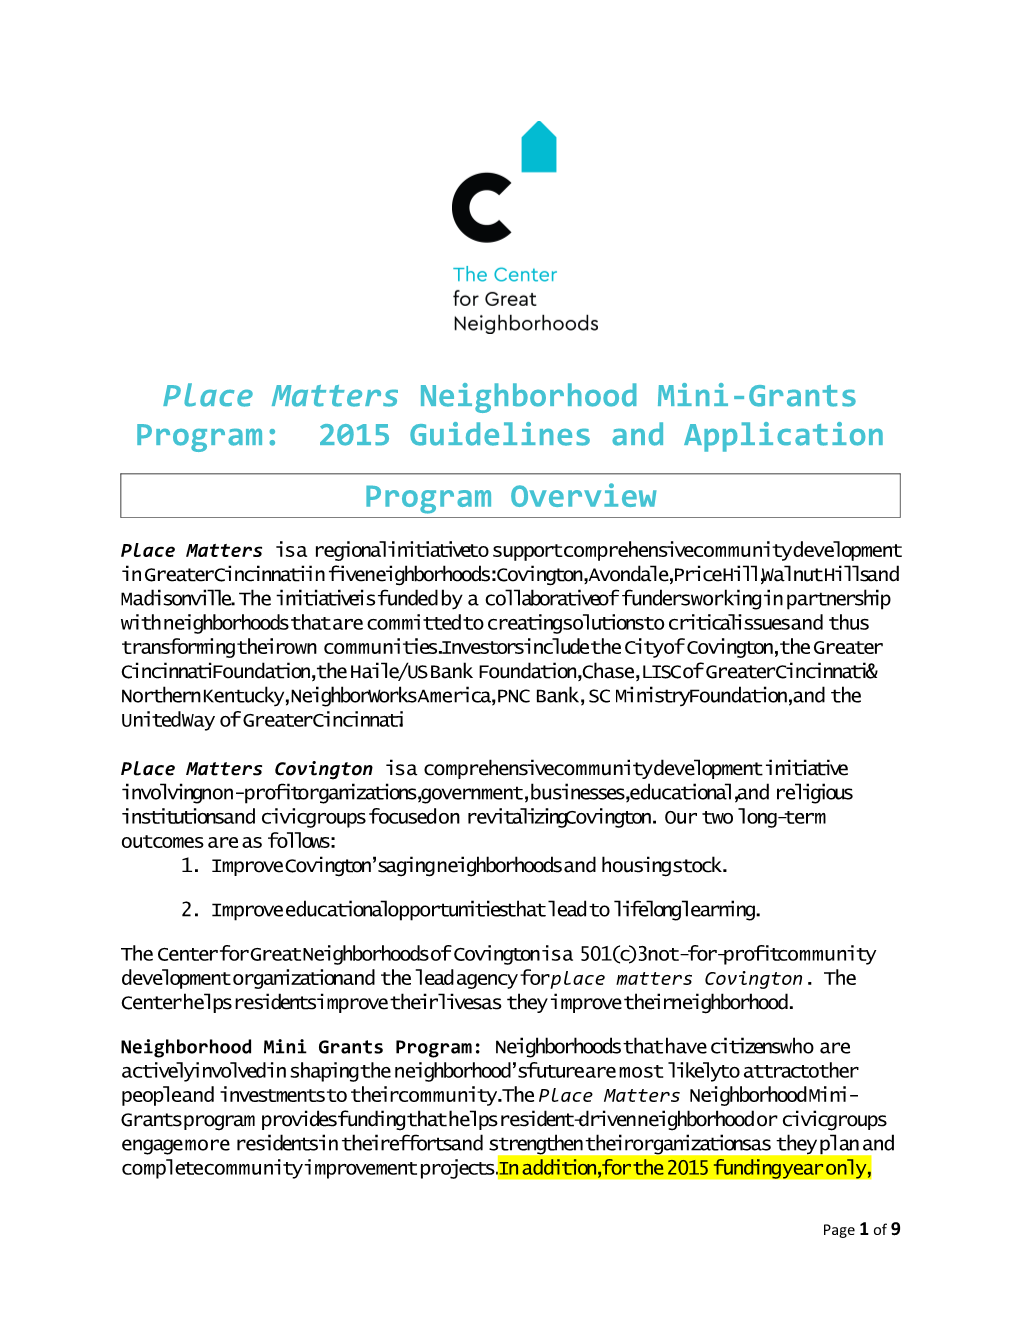 Place Matters Neighborhood Mini-Grants Program: 2015 Guidelines and Application